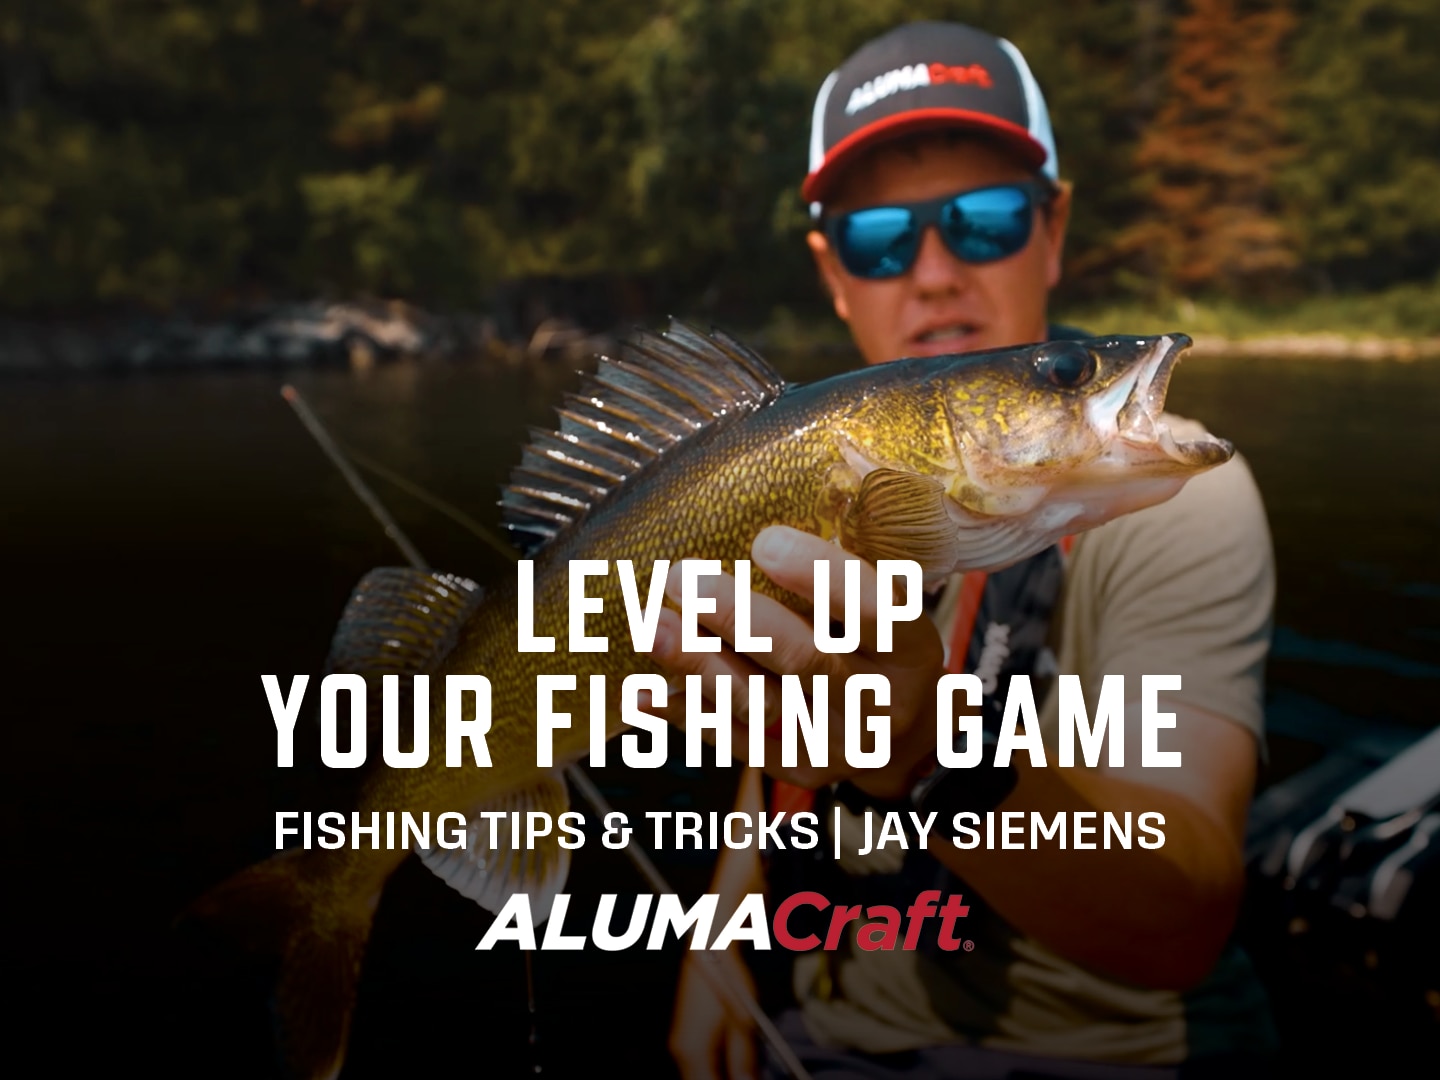 Jay Siemens, Level Up Your Fishing Game